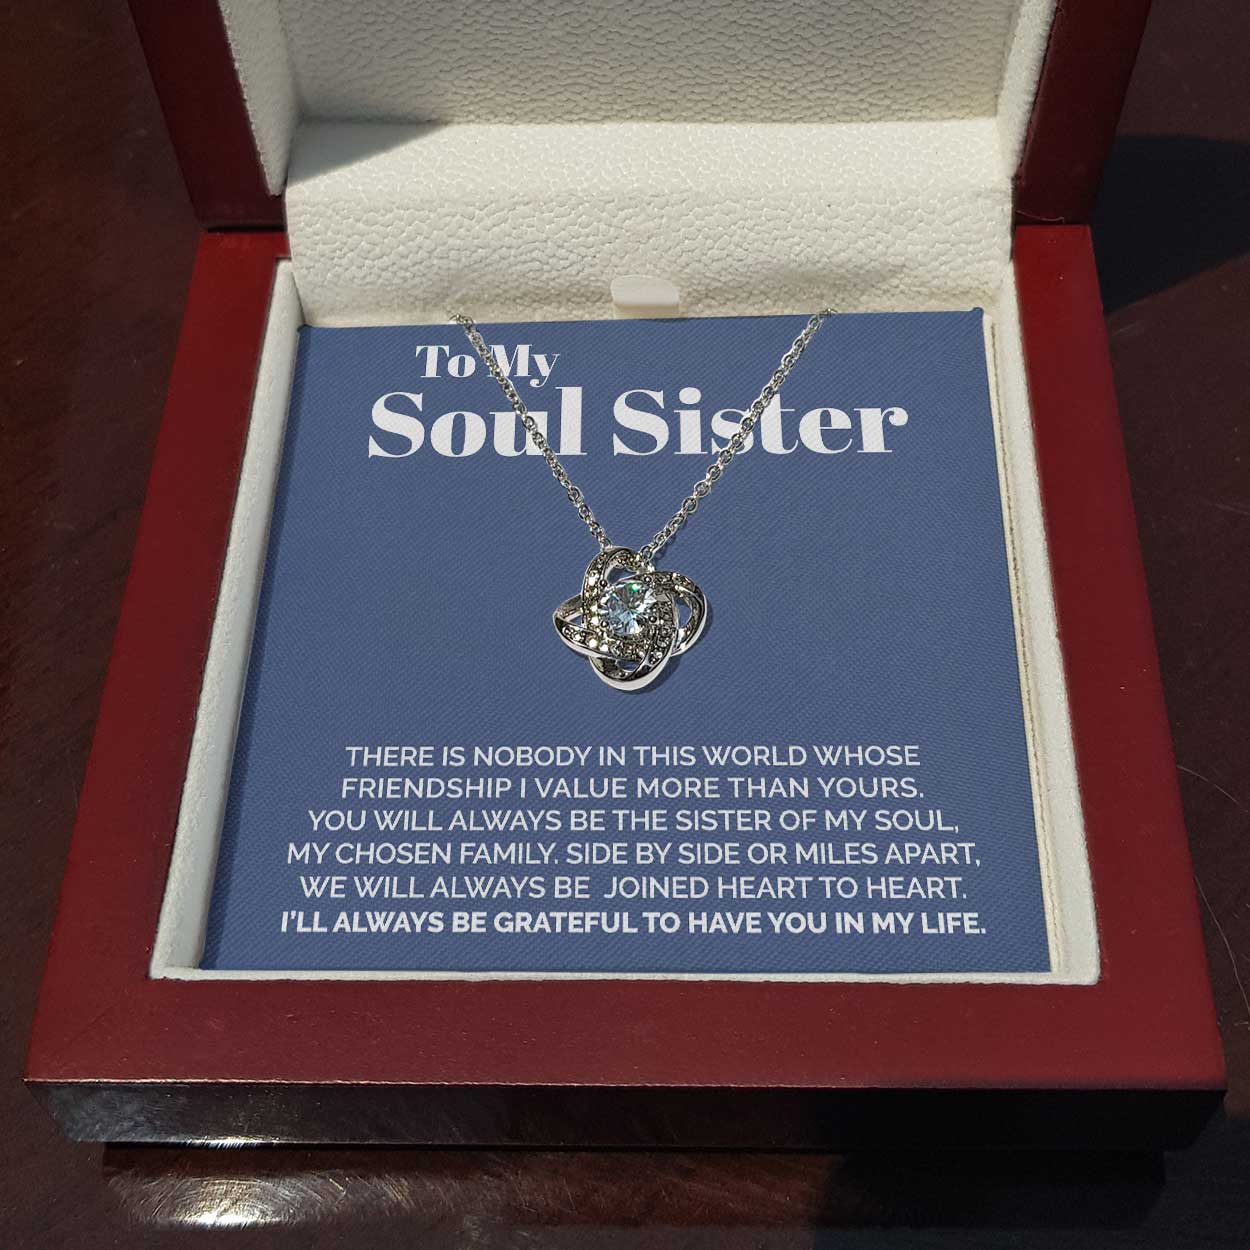 ShineOn Fulfillment Jewelry Standard Box To My Soul Sister - You Will Always Be The Sister of My Soul - Love Knot Necklace